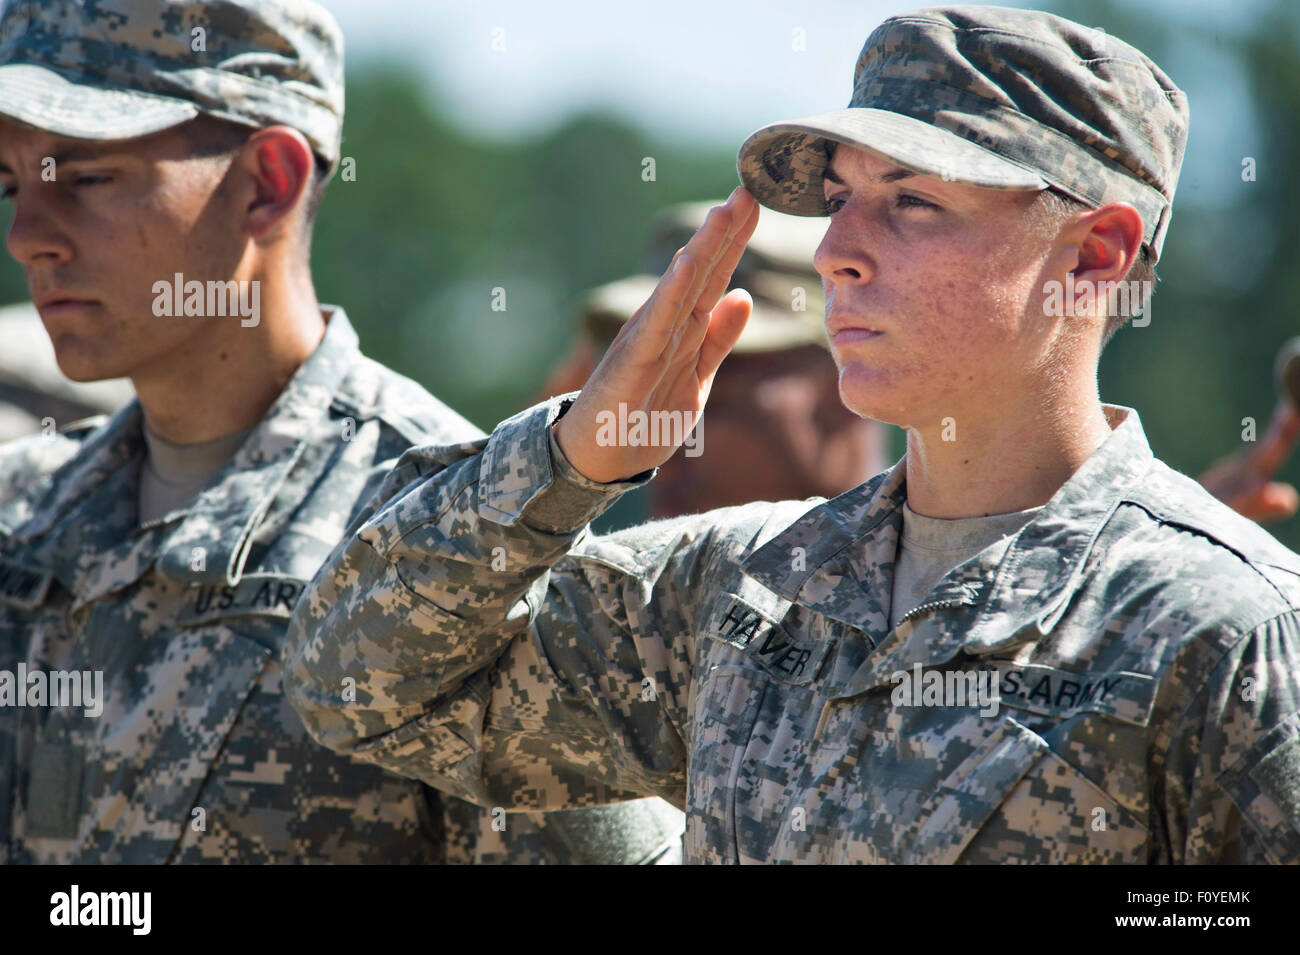 U.S. Army 1st Lt. Shaye Haver salutes during graduation ceremonies at the Army Ranger school August 21, 2015 in Fort Benning, Georgia. Haver and fellow soldier Captain Kristen Griest became the first women to graduate from the 61-day-long Ranger course considered one of the most intense and demanding in the military. Stock Photo